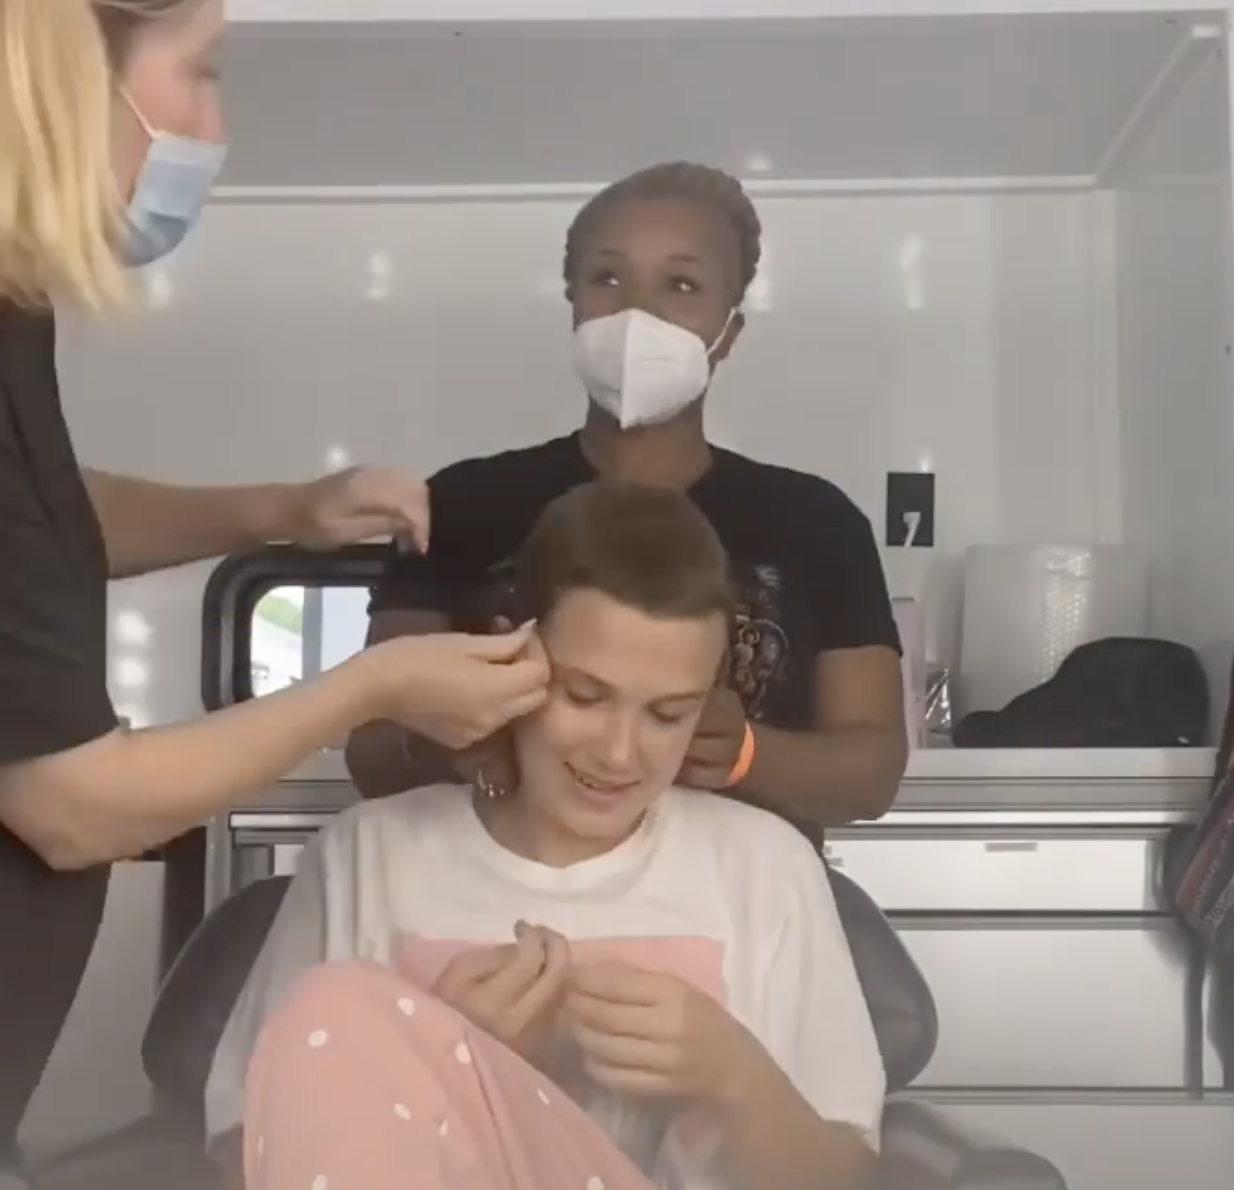 Millie smiling as stylists touch her hair